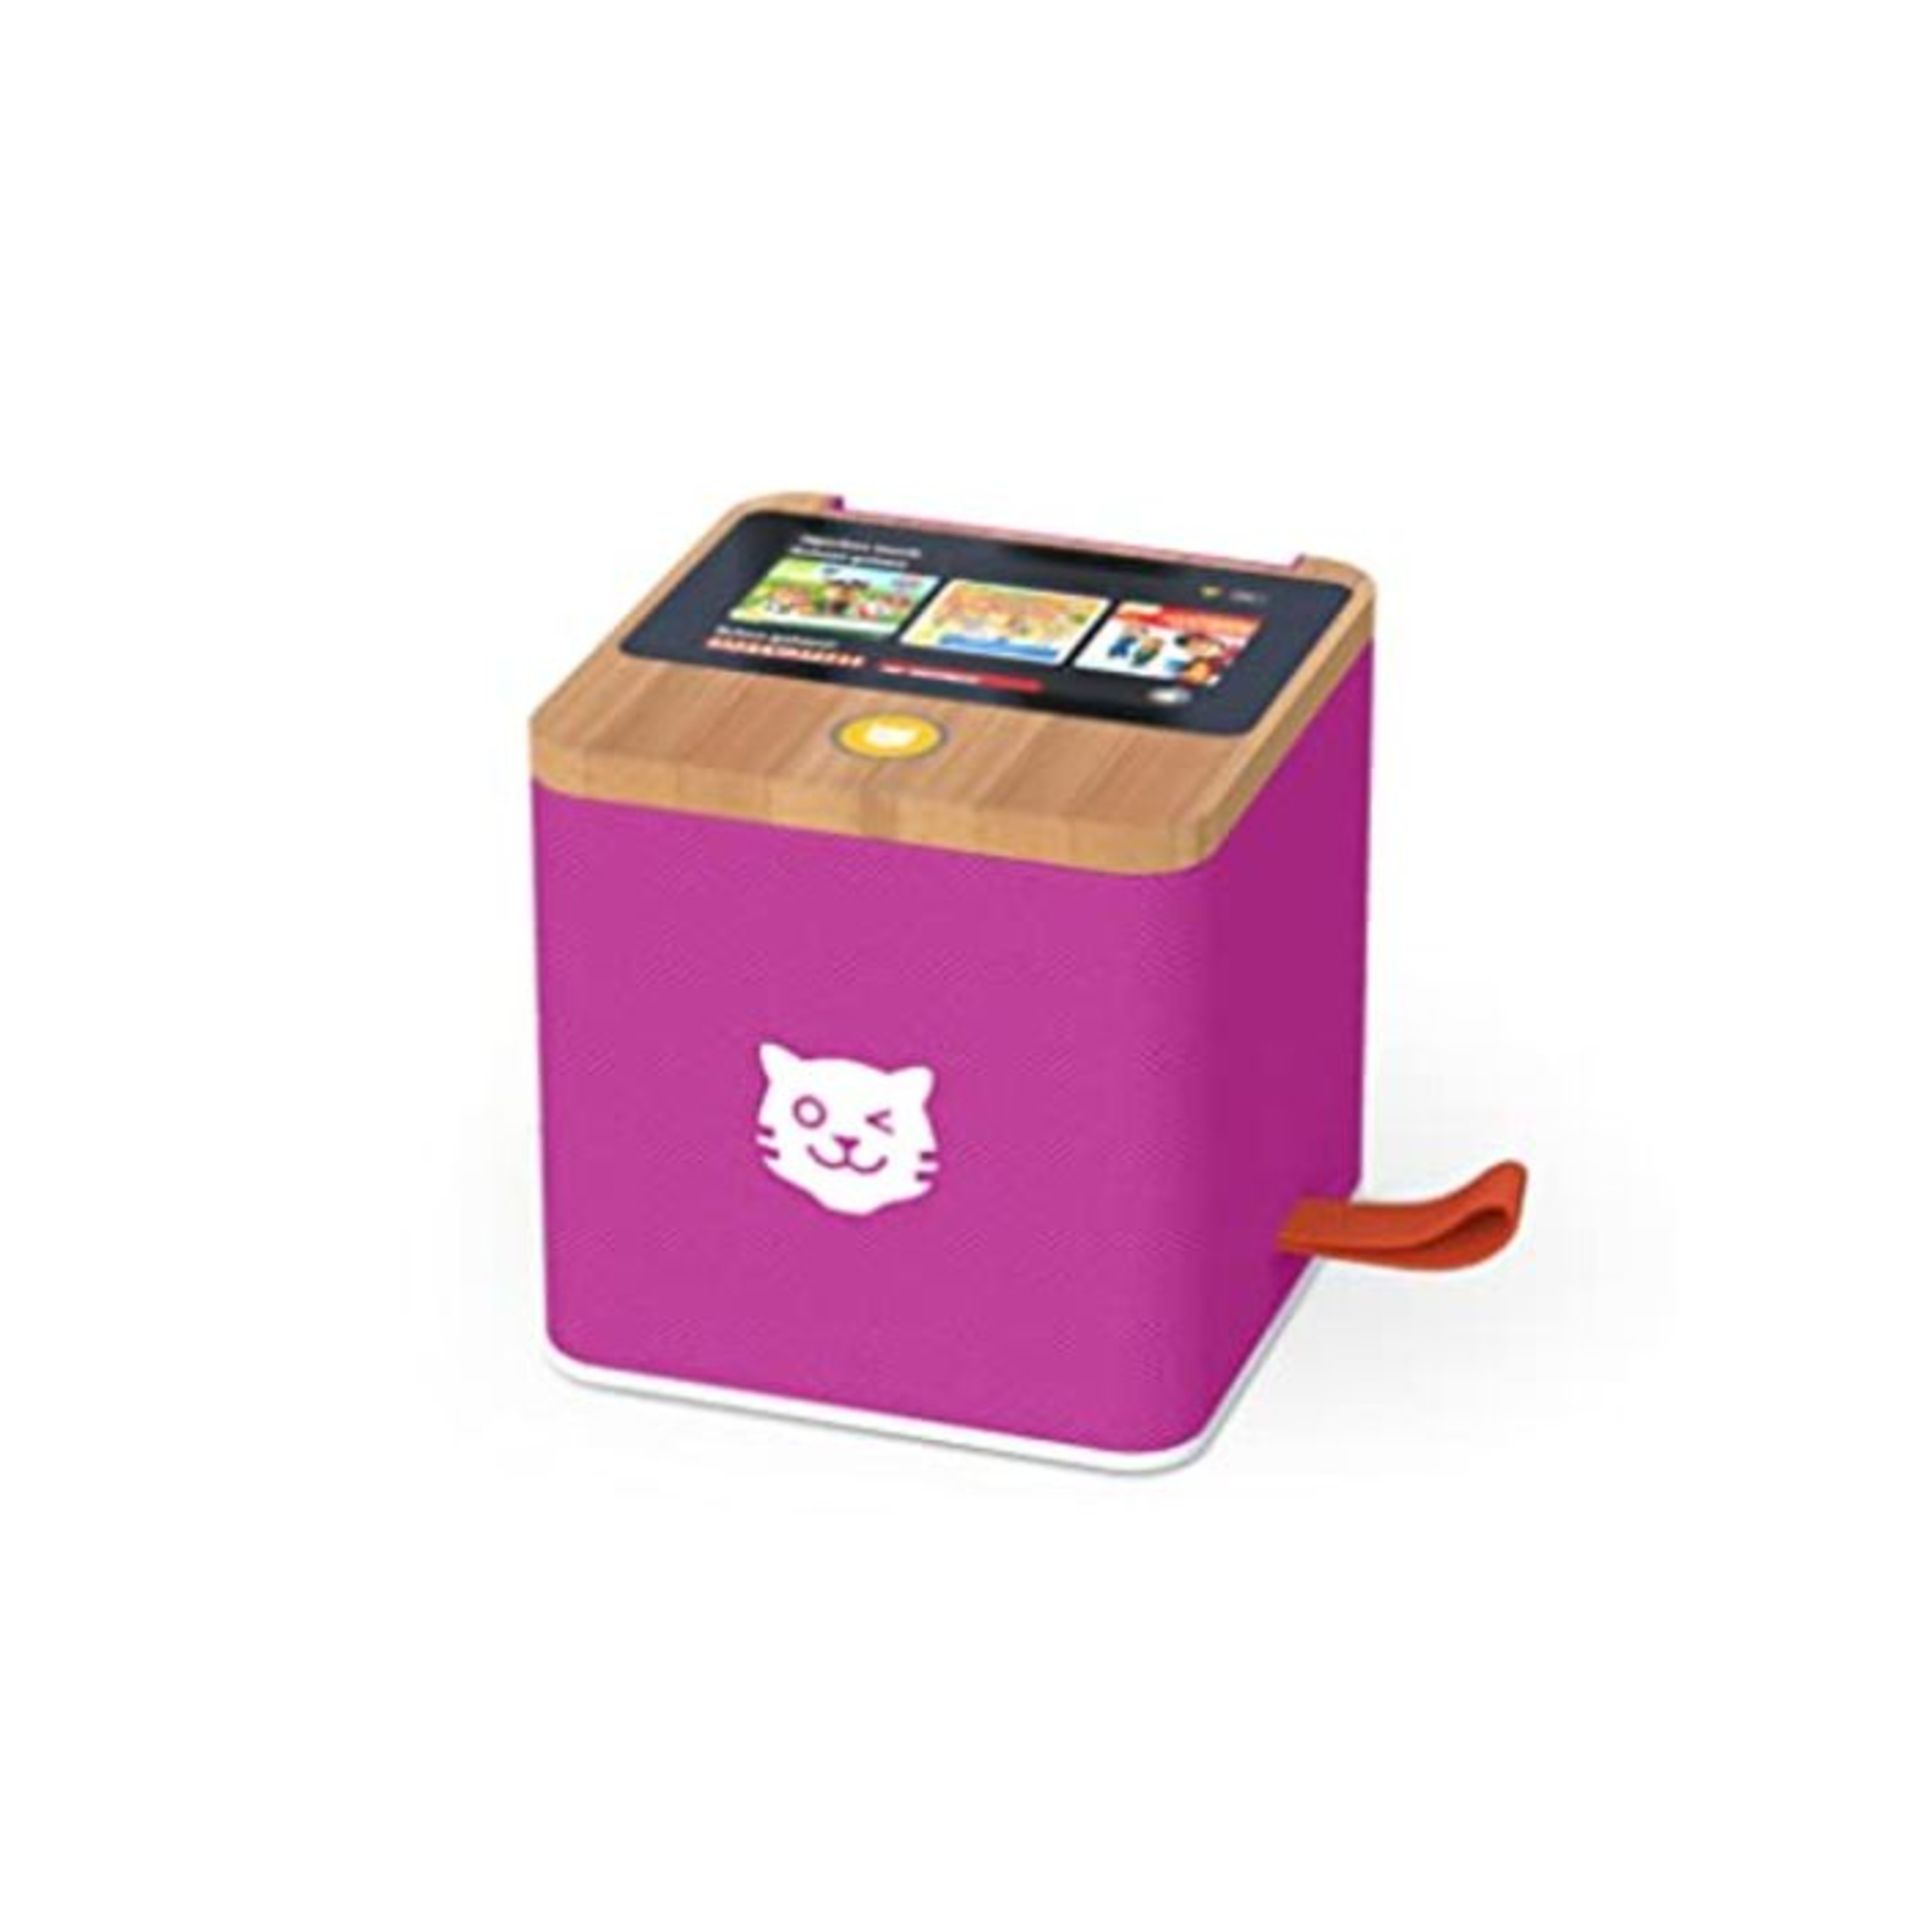 RRP £78.00 tigerbox TOUCH - wireless streaming box for children, easy-to-use audio box for radio